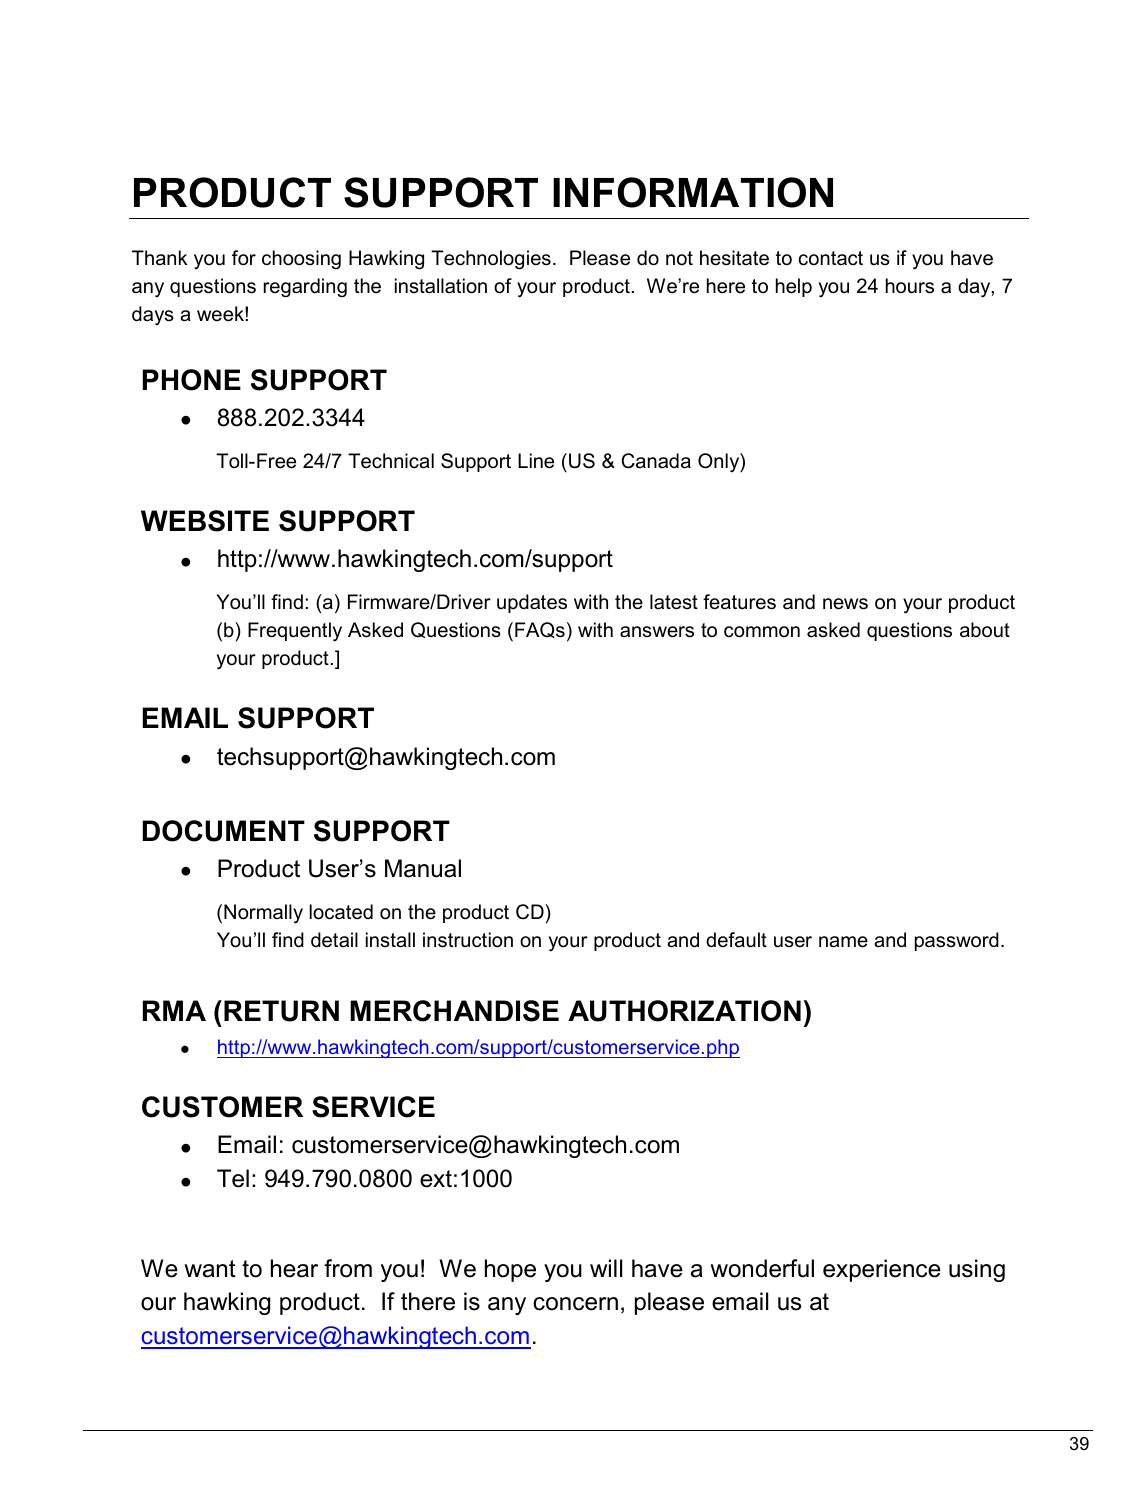   39                                                  PRODUCT SUPPORT INFORMATION  Thank you for choosing Hawking Technologies.  Please do not hesitate to contact us if you have any questions regarding the  installation of your product.  We’re here to help you 24 hours a day, 7 days a week!  PHONE SUPPORT  •  888.202.3344 Toll-Free 24/7 Technical Support Line (US &amp; Canada Only)  WEBSITE SUPPORT  •  http://www.hawkingtech.com/support You’ll find: (a) Firmware/Driver updates with the latest features and news on your product (b) Frequently Asked Questions (FAQs) with answers to common asked questions about your product.]  EMAIL SUPPORT •  techsupport@hawkingtech.com     DOCUMENT SUPPORT •  Product User’s Manual  (Normally located on the product CD) You’ll find detail install instruction on your product and default user name and password.   RMA (RETURN MERCHANDISE AUTHORIZATION) • http://www.hawkingtech.com/support/customerservice.php  CUSTOMER SERVICE •  Email: customerservice@hawkingtech.com •  Tel: 949.790.0800 ext:1000   We want to hear from you!  We hope you will have a wonderful experience using our hawking product.  If there is any concern, please email us at customerservice@hawkingtech.com.  